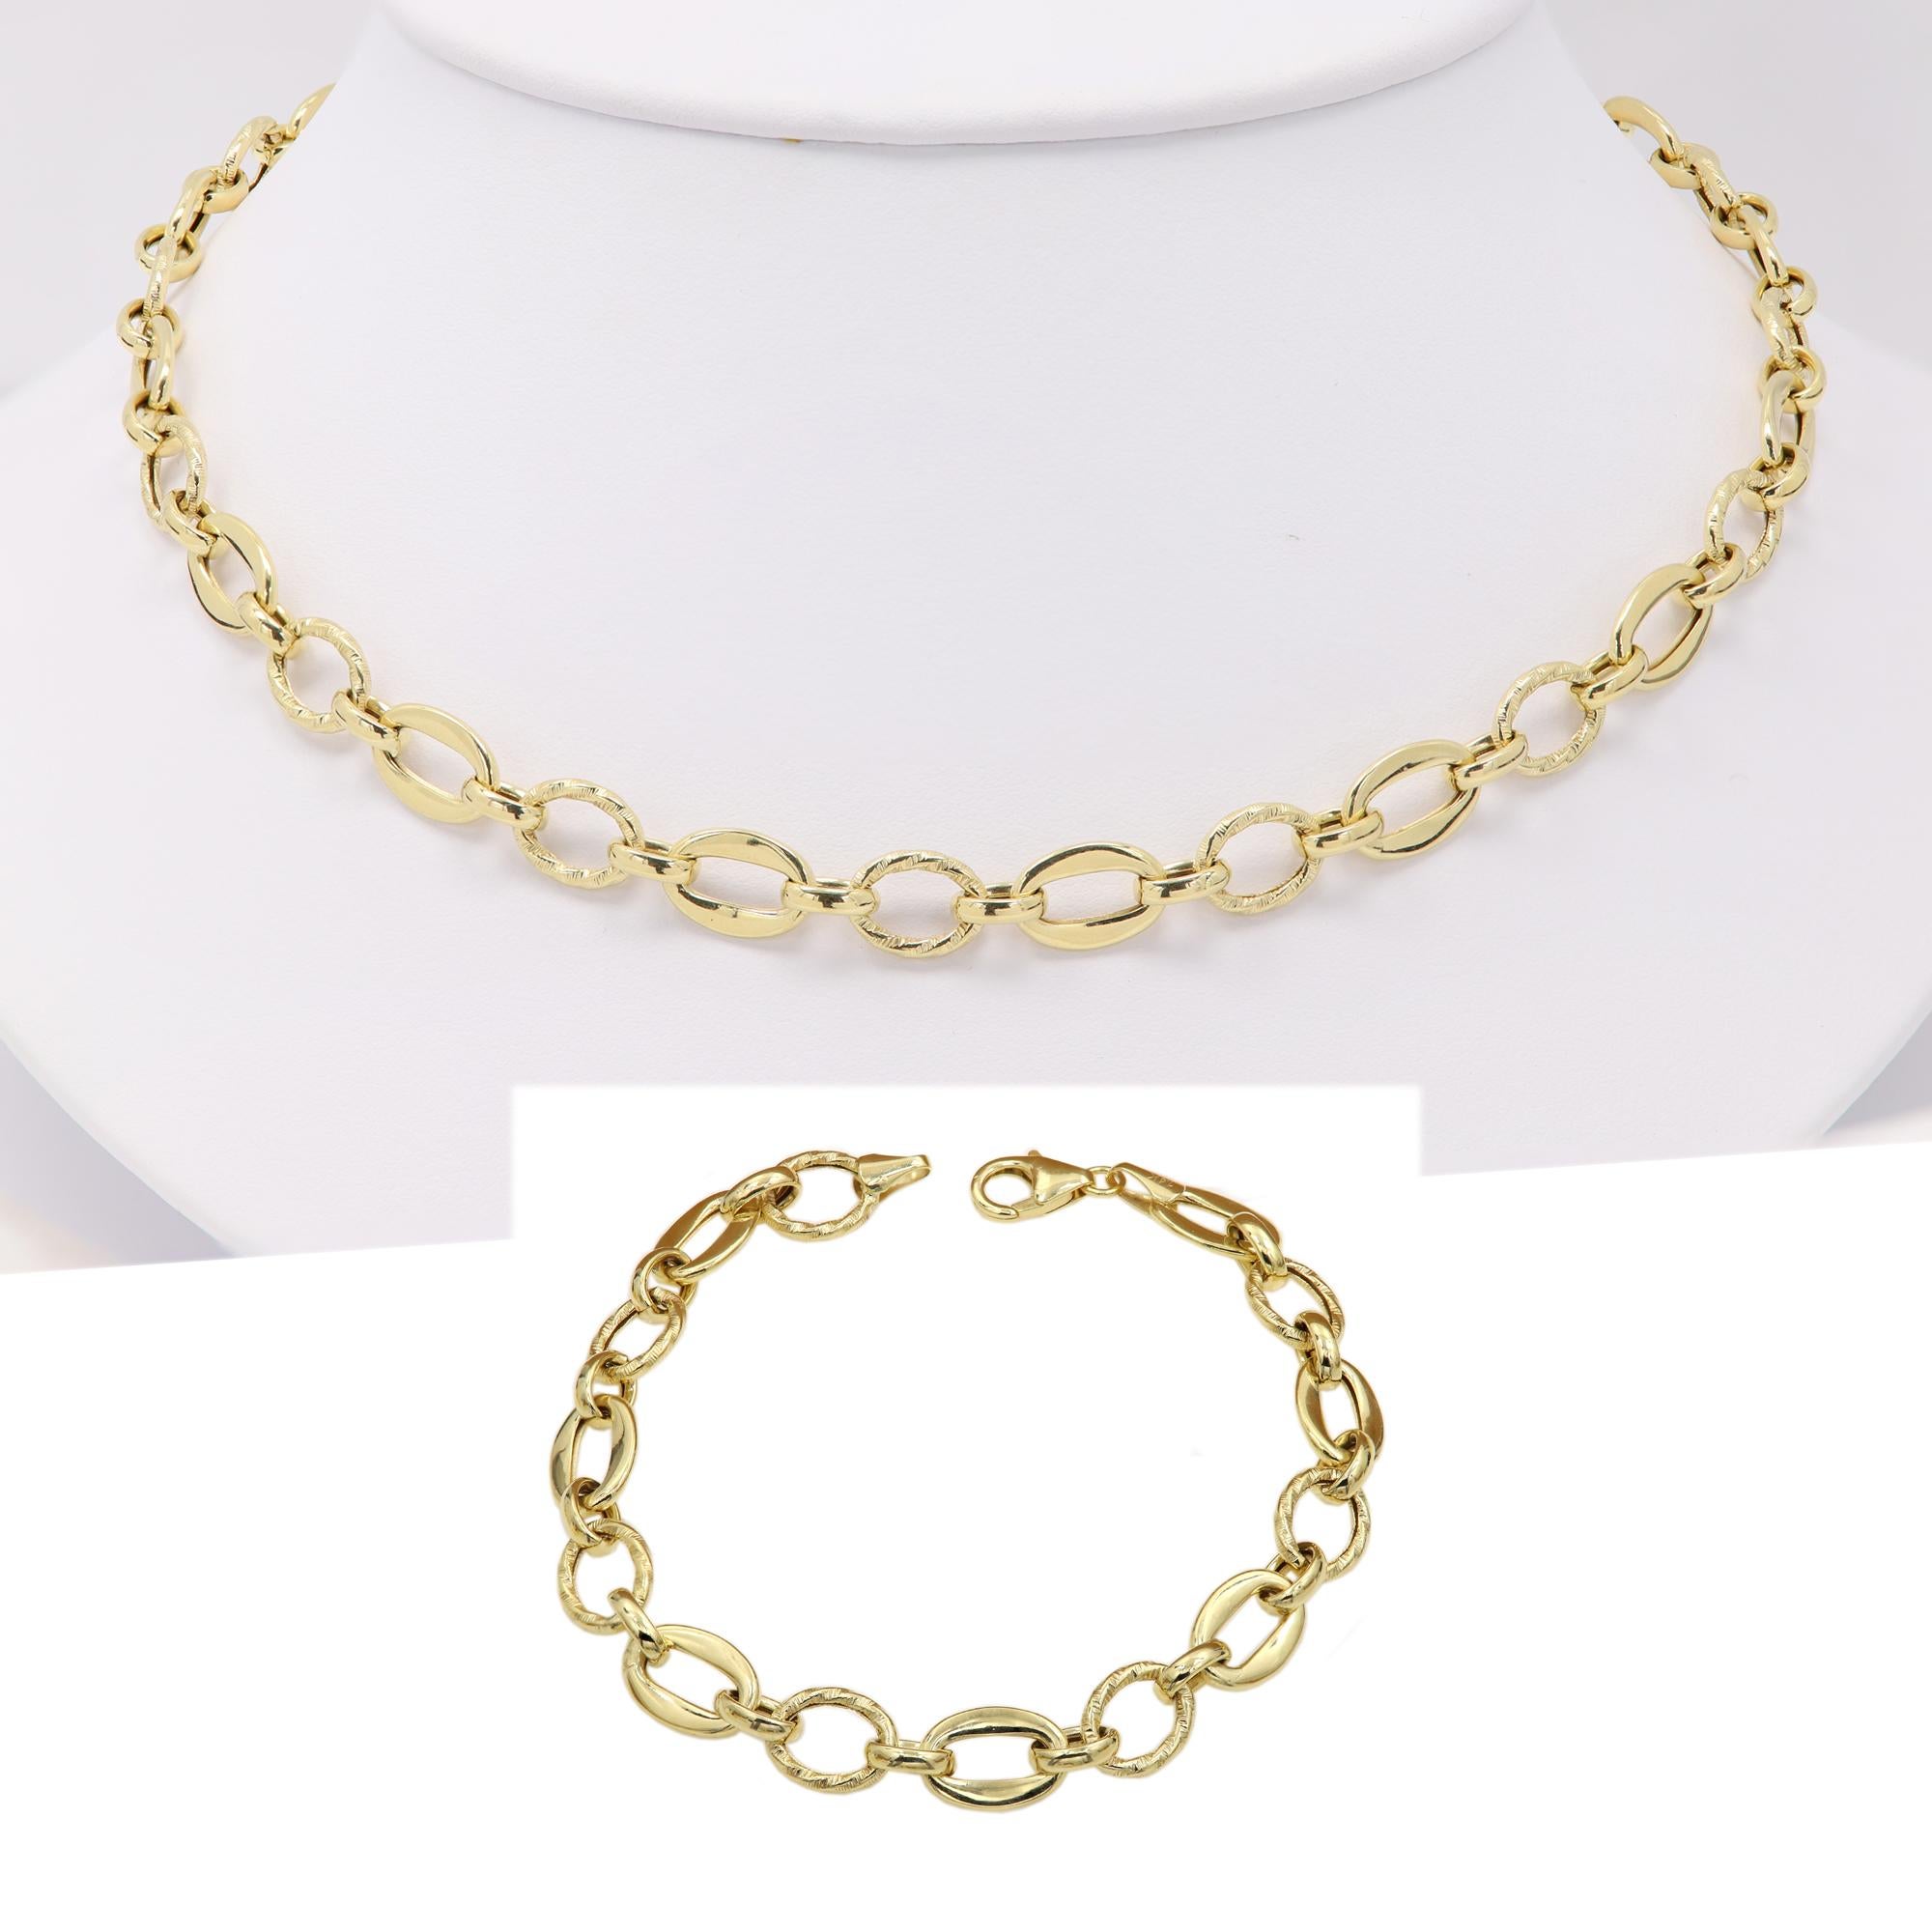 Italian Creative Link Chain set Necklace and Bracelet 14 Karat Yellow Gold Links For Sale 7